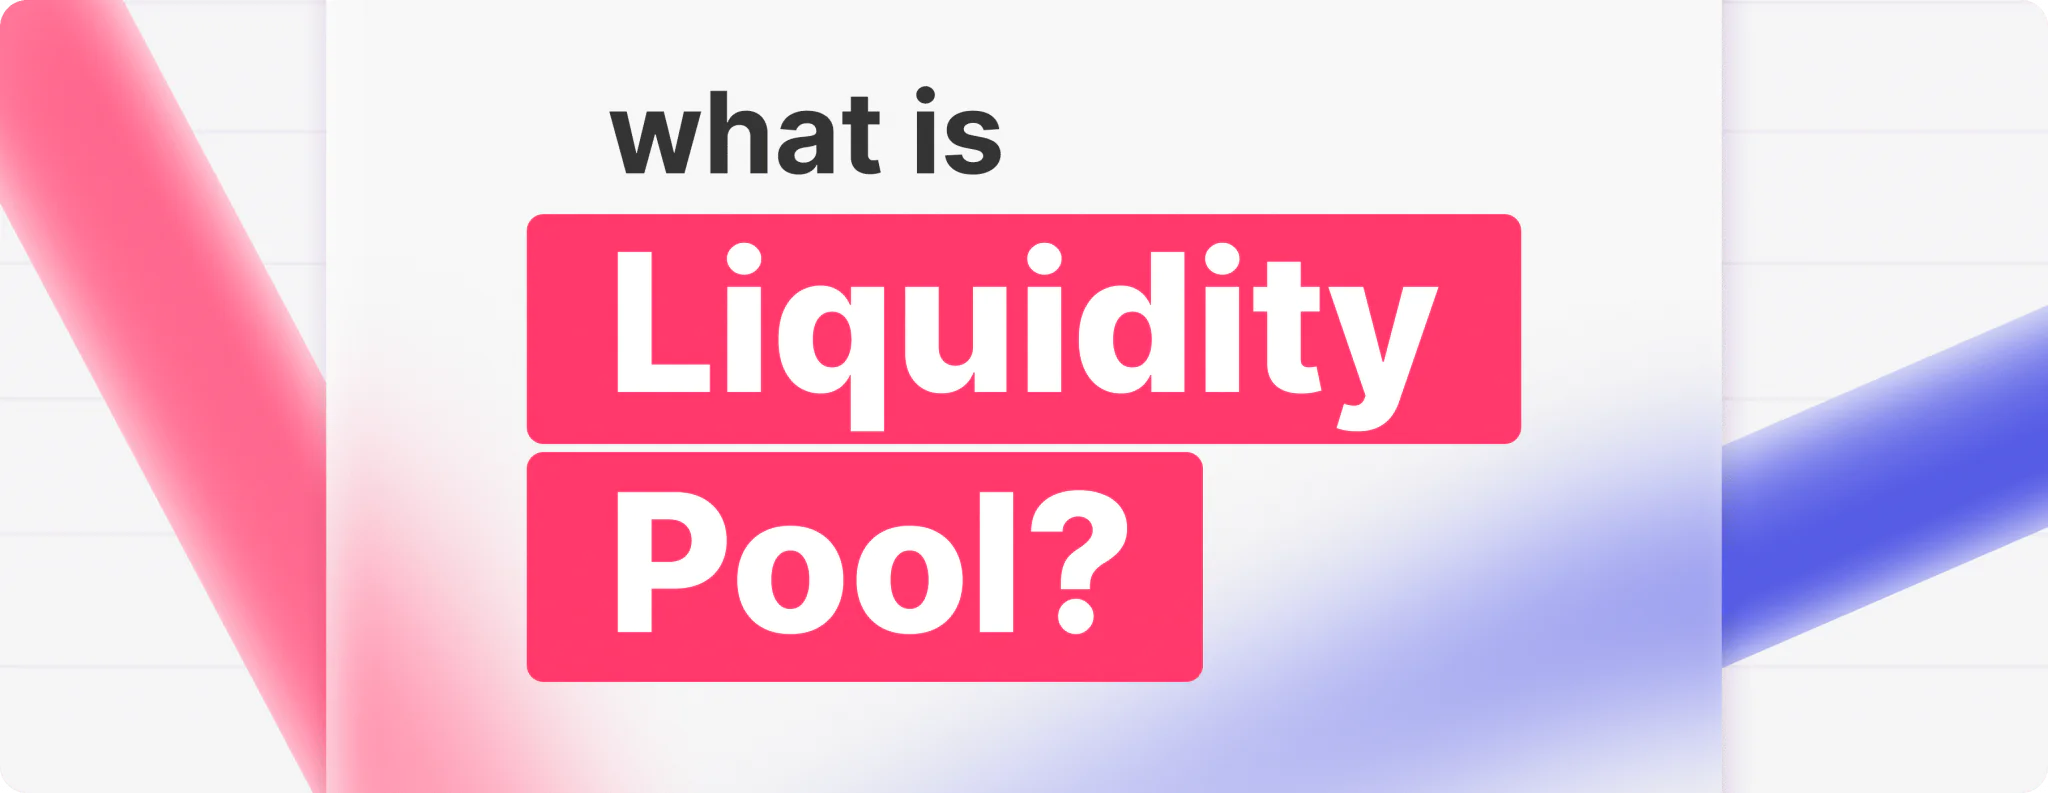 What is a Liquidity Pool? 